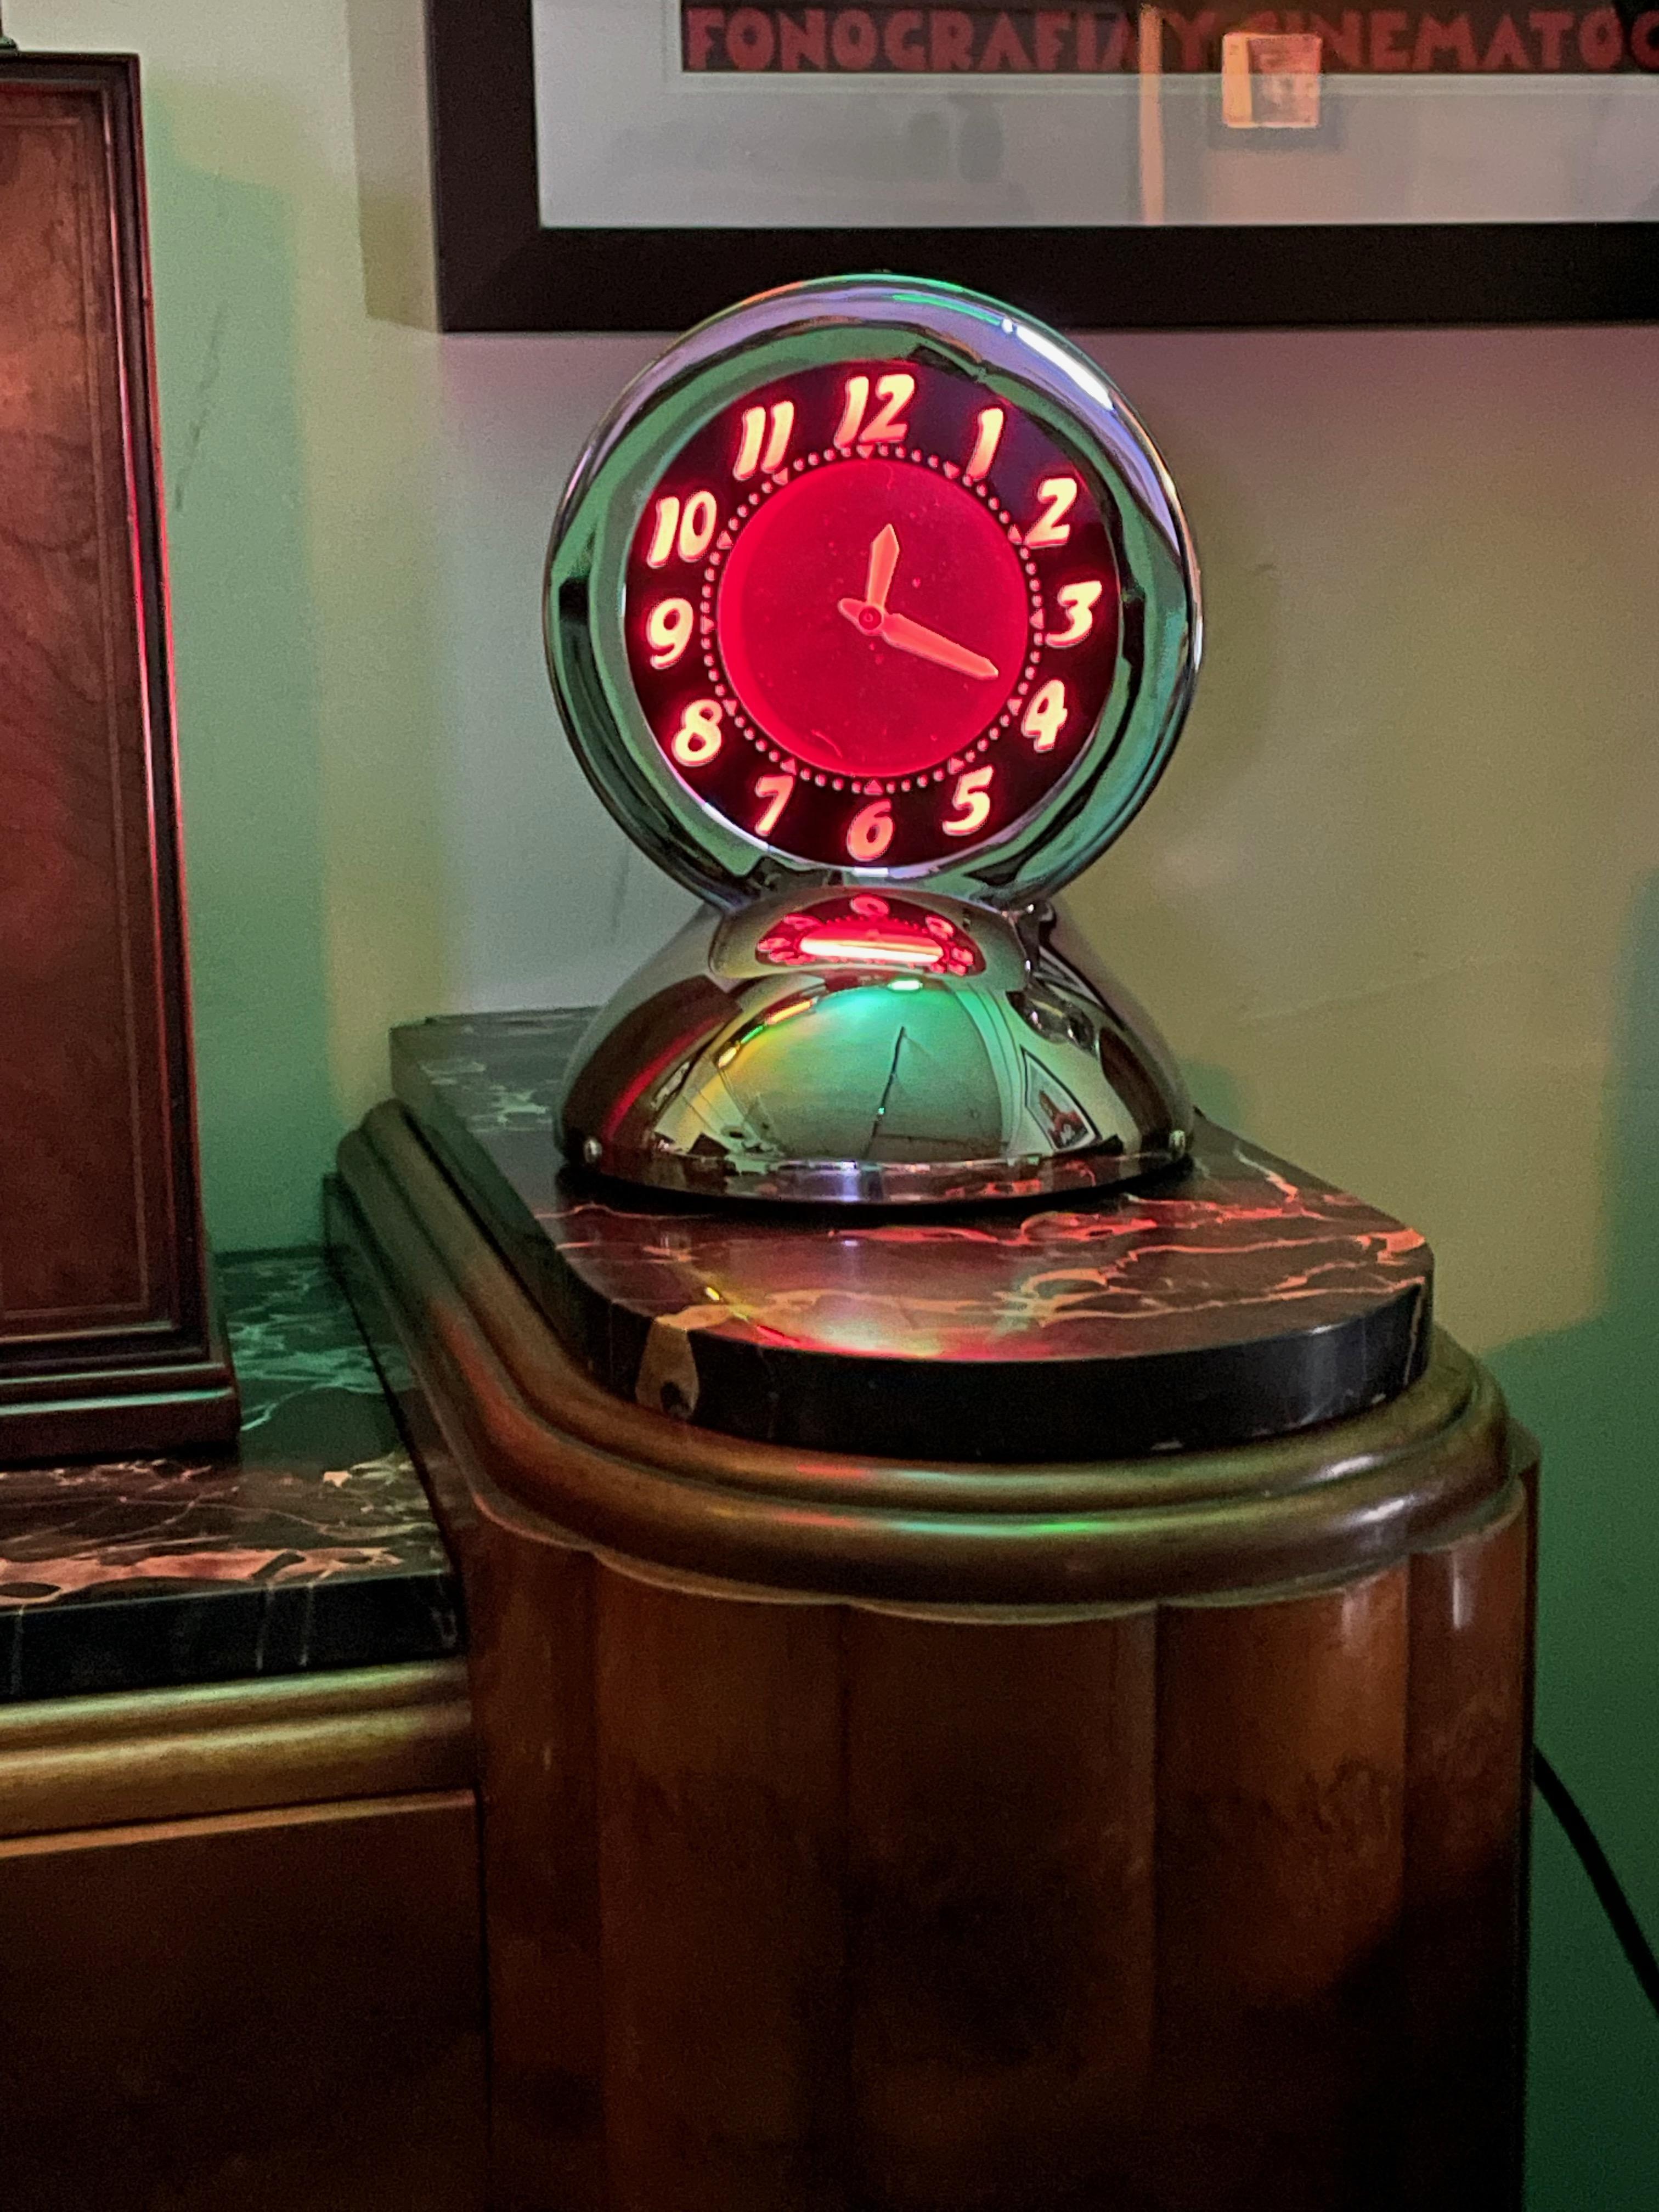 Art Deco Glo Dial neon chrome desk clock with ruby red neon. Very rare and original light. Great looking dial with unusual red color. Hard to make new neon with this red color. Mostly you see orange, pink & green. The chrome body was recently